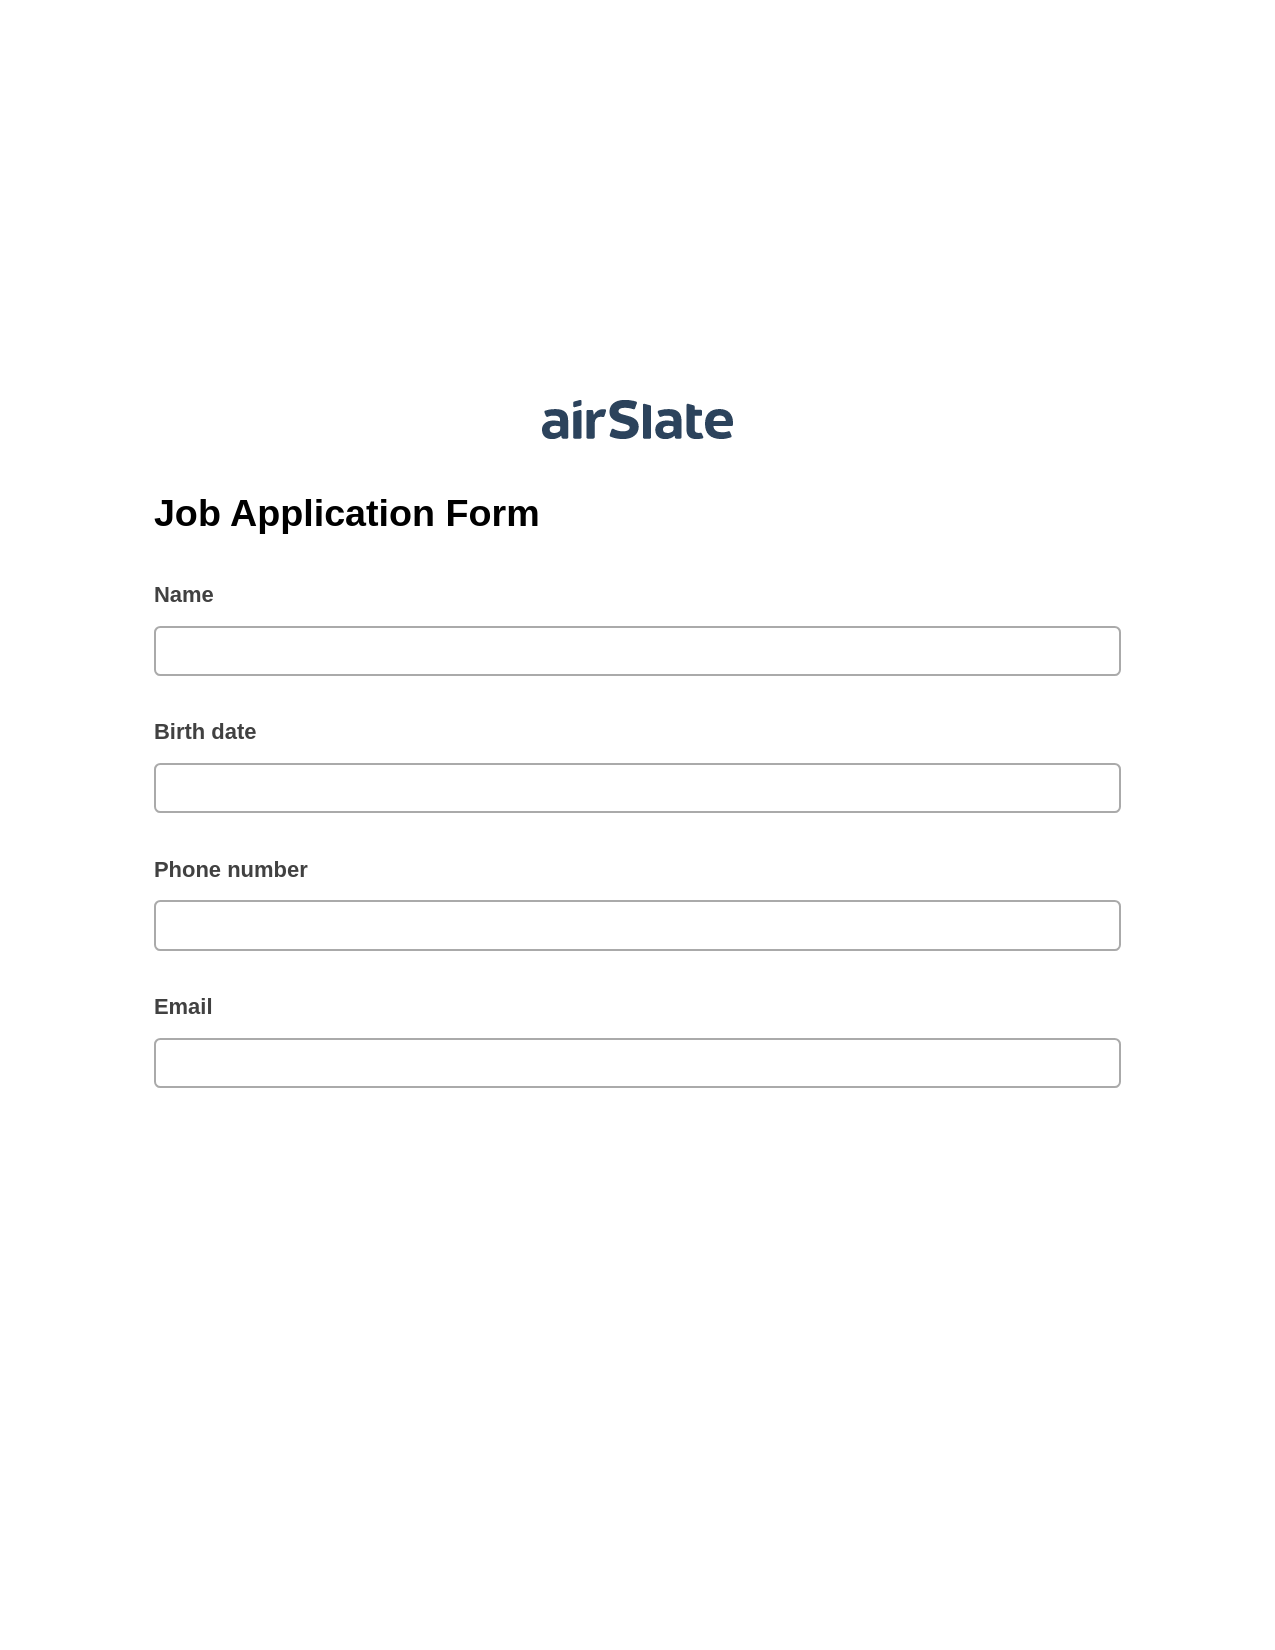 Job Application Form Pre-fill from Office 365 Excel Bot, Create NetSuite Records Bot, Export to Formstack Documents Bot